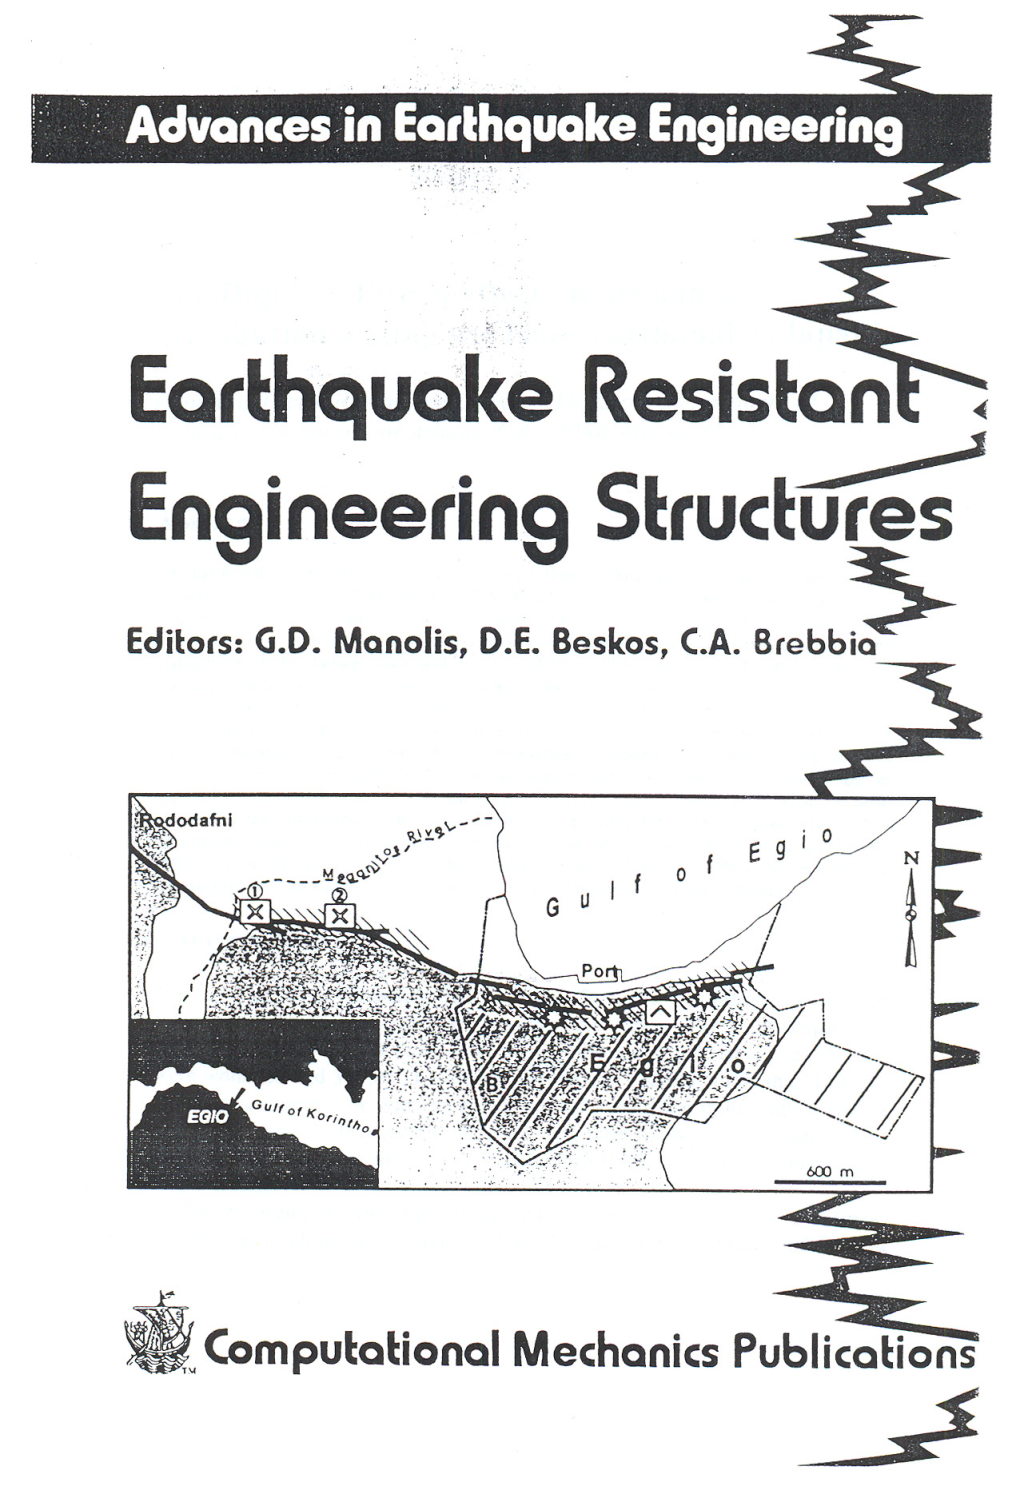 Linear Damage Distribution and Seismic Fractures at the Egio Earthquake (15 June 1995, Greece) E